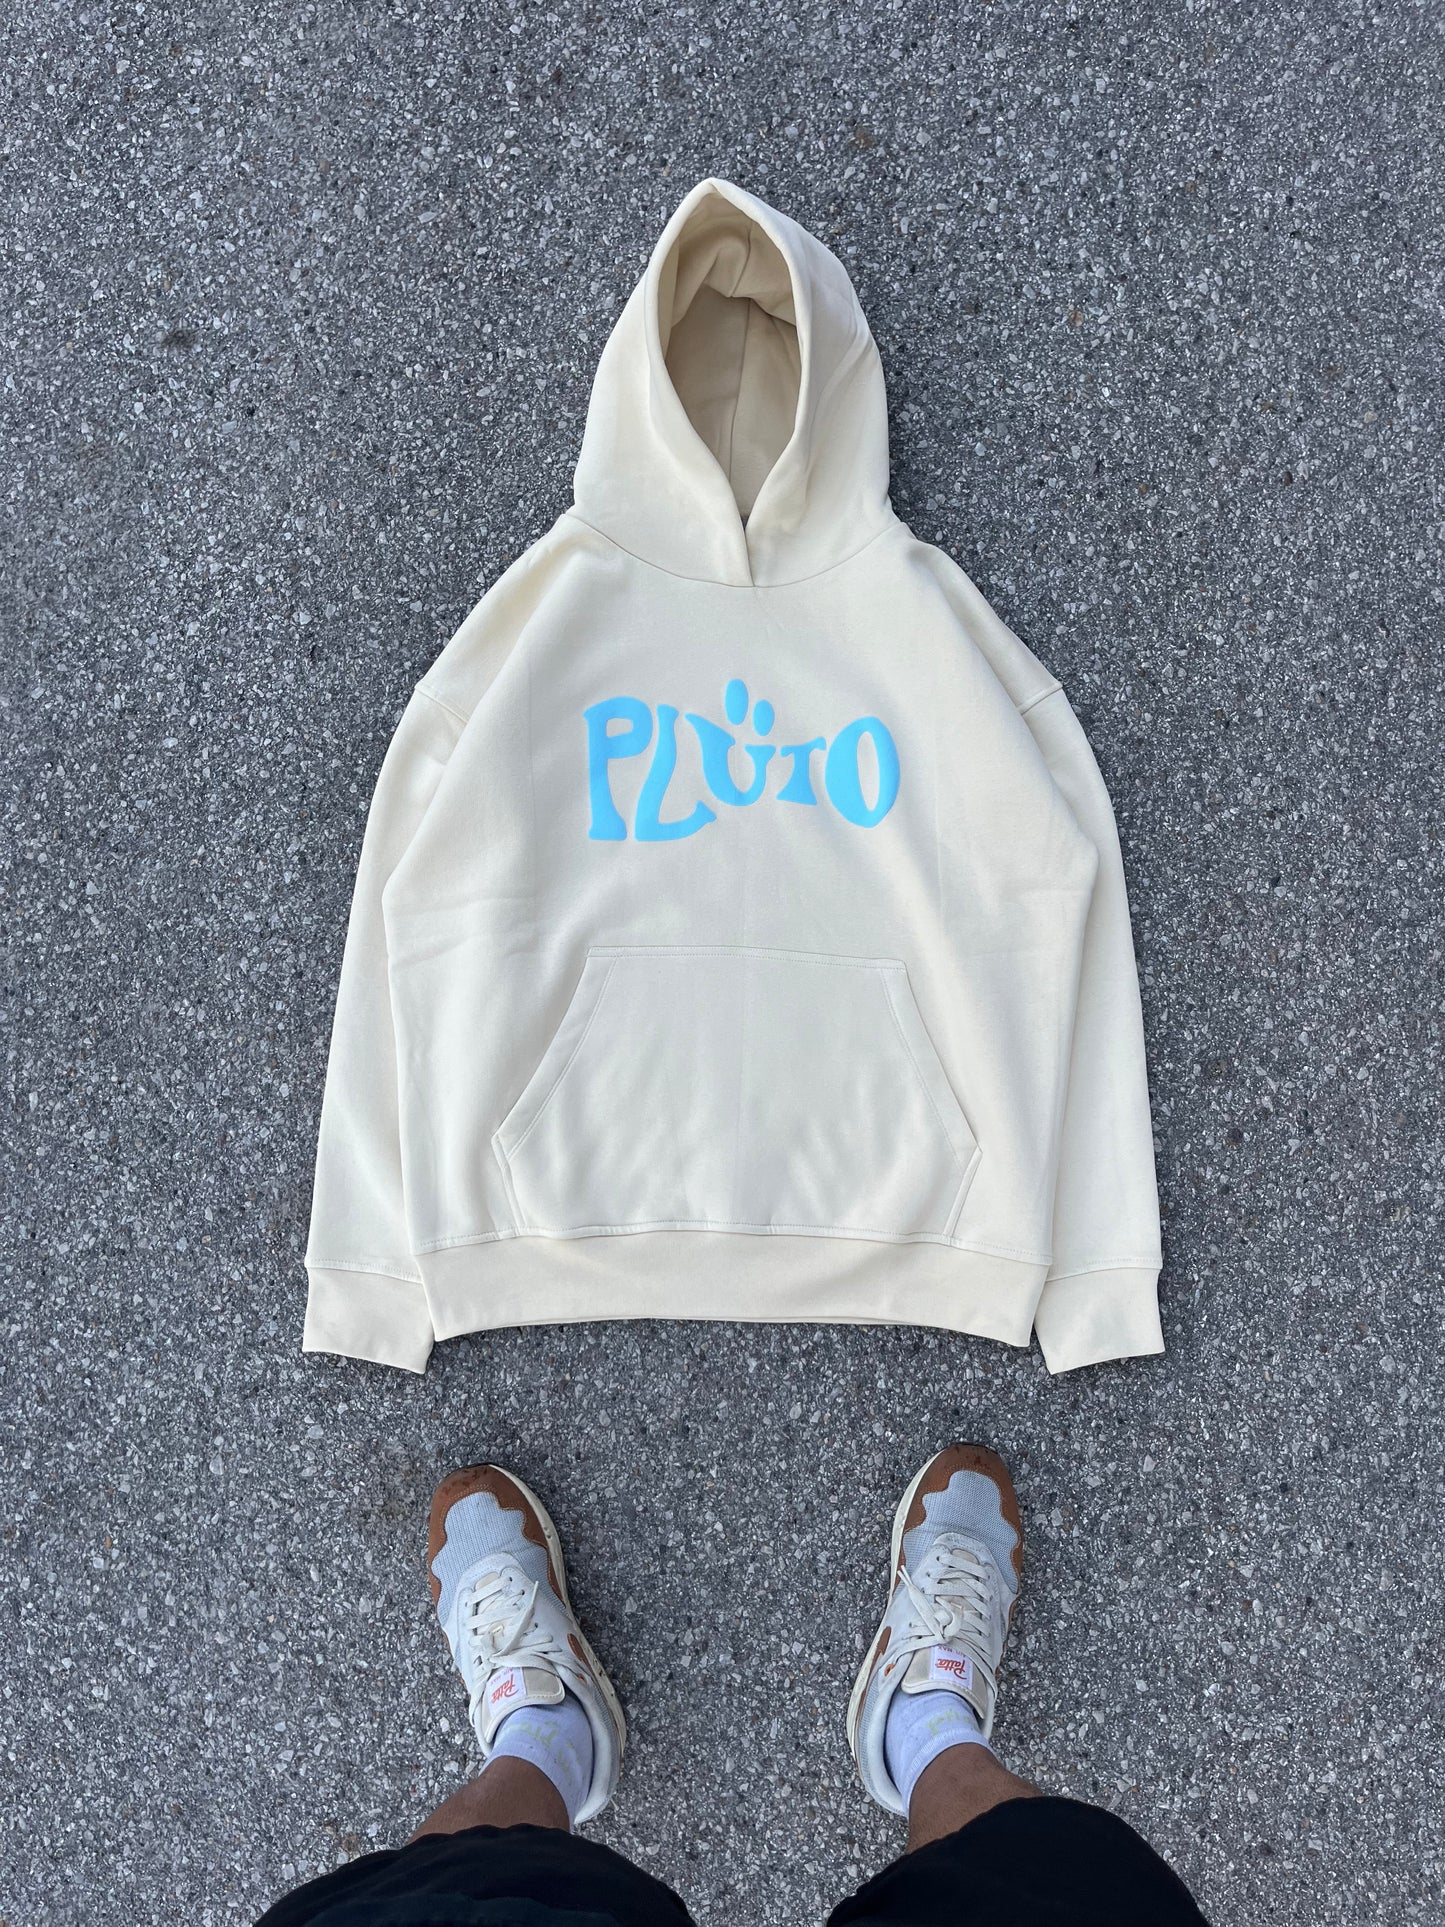 YOUR NEW FAVORITE HOODIE